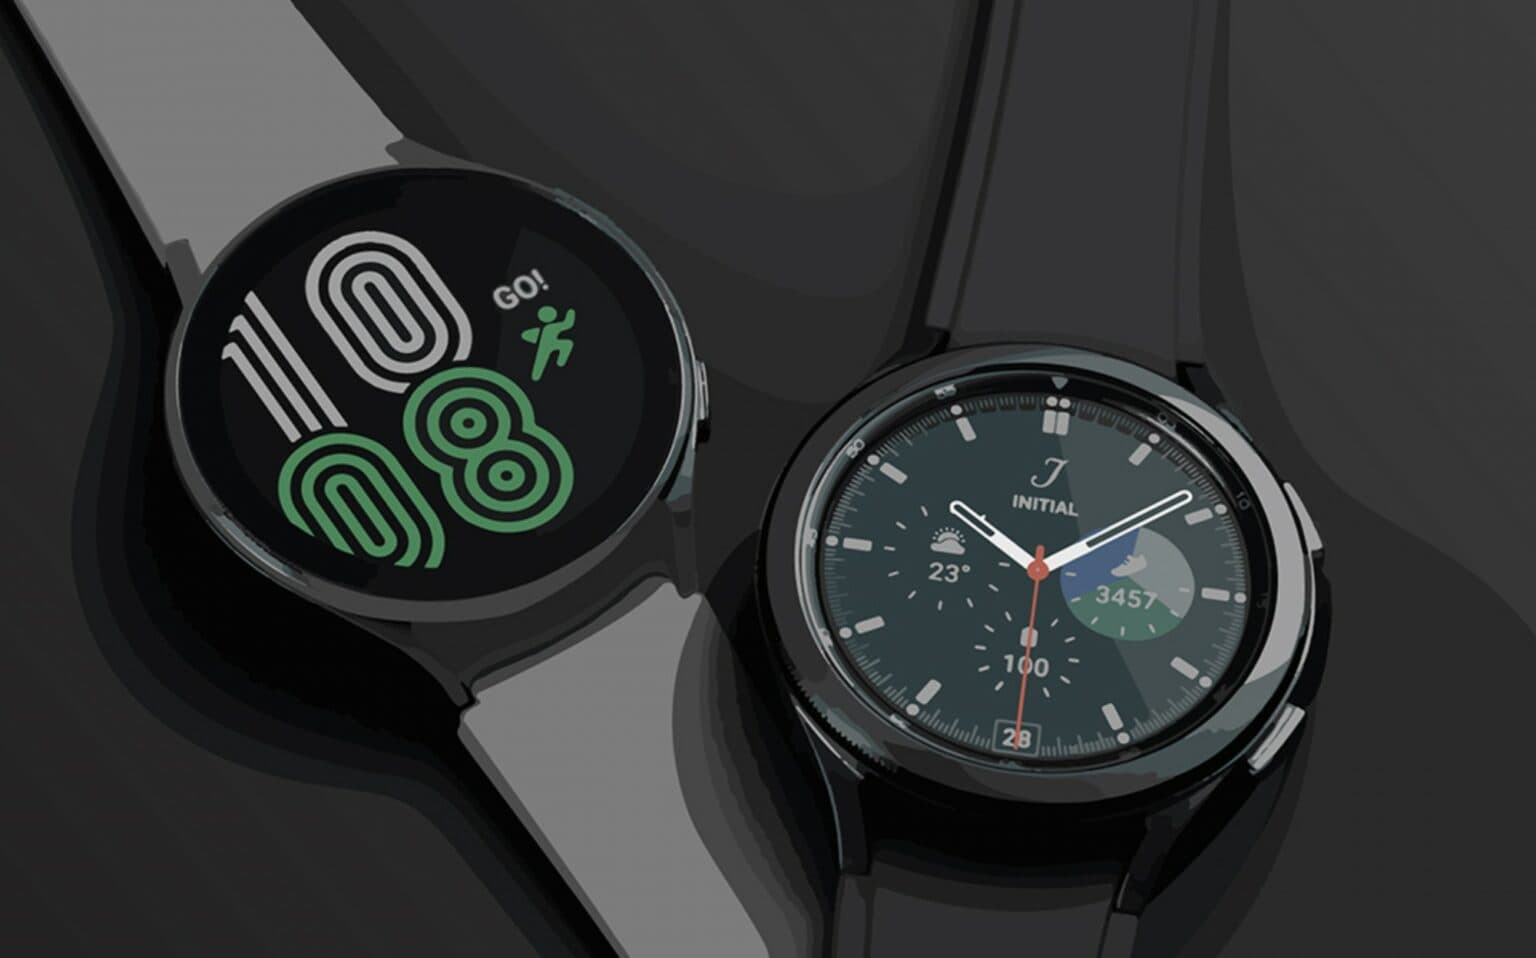 Samsung Galaxy Watch 4 drops iPhone support